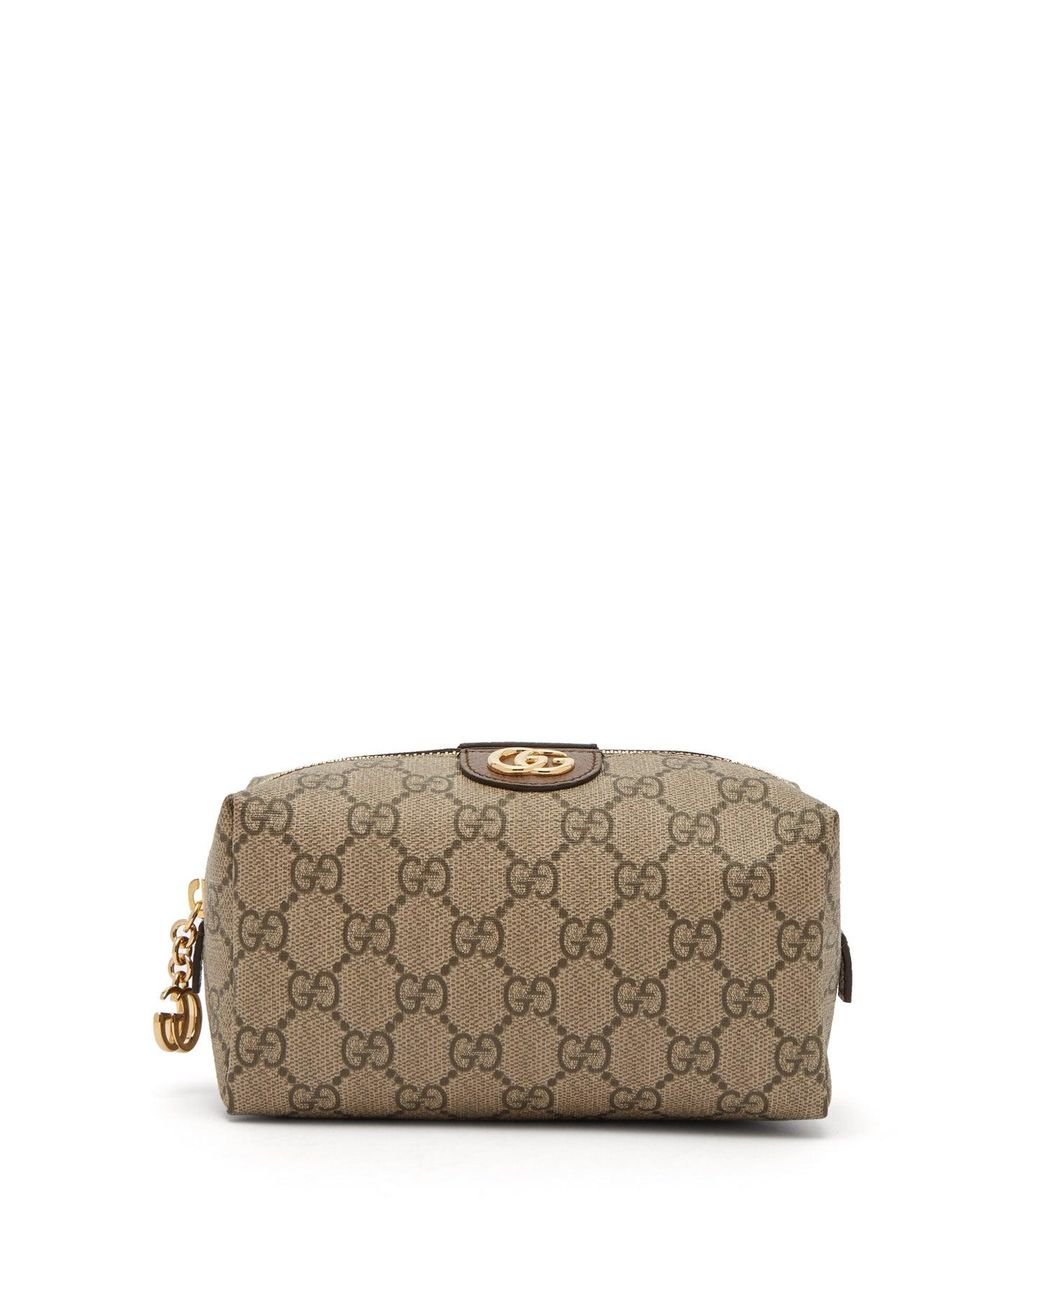 Gucci Ophidia Gg Supreme Canvas Make Up Bag in Gray - Lyst